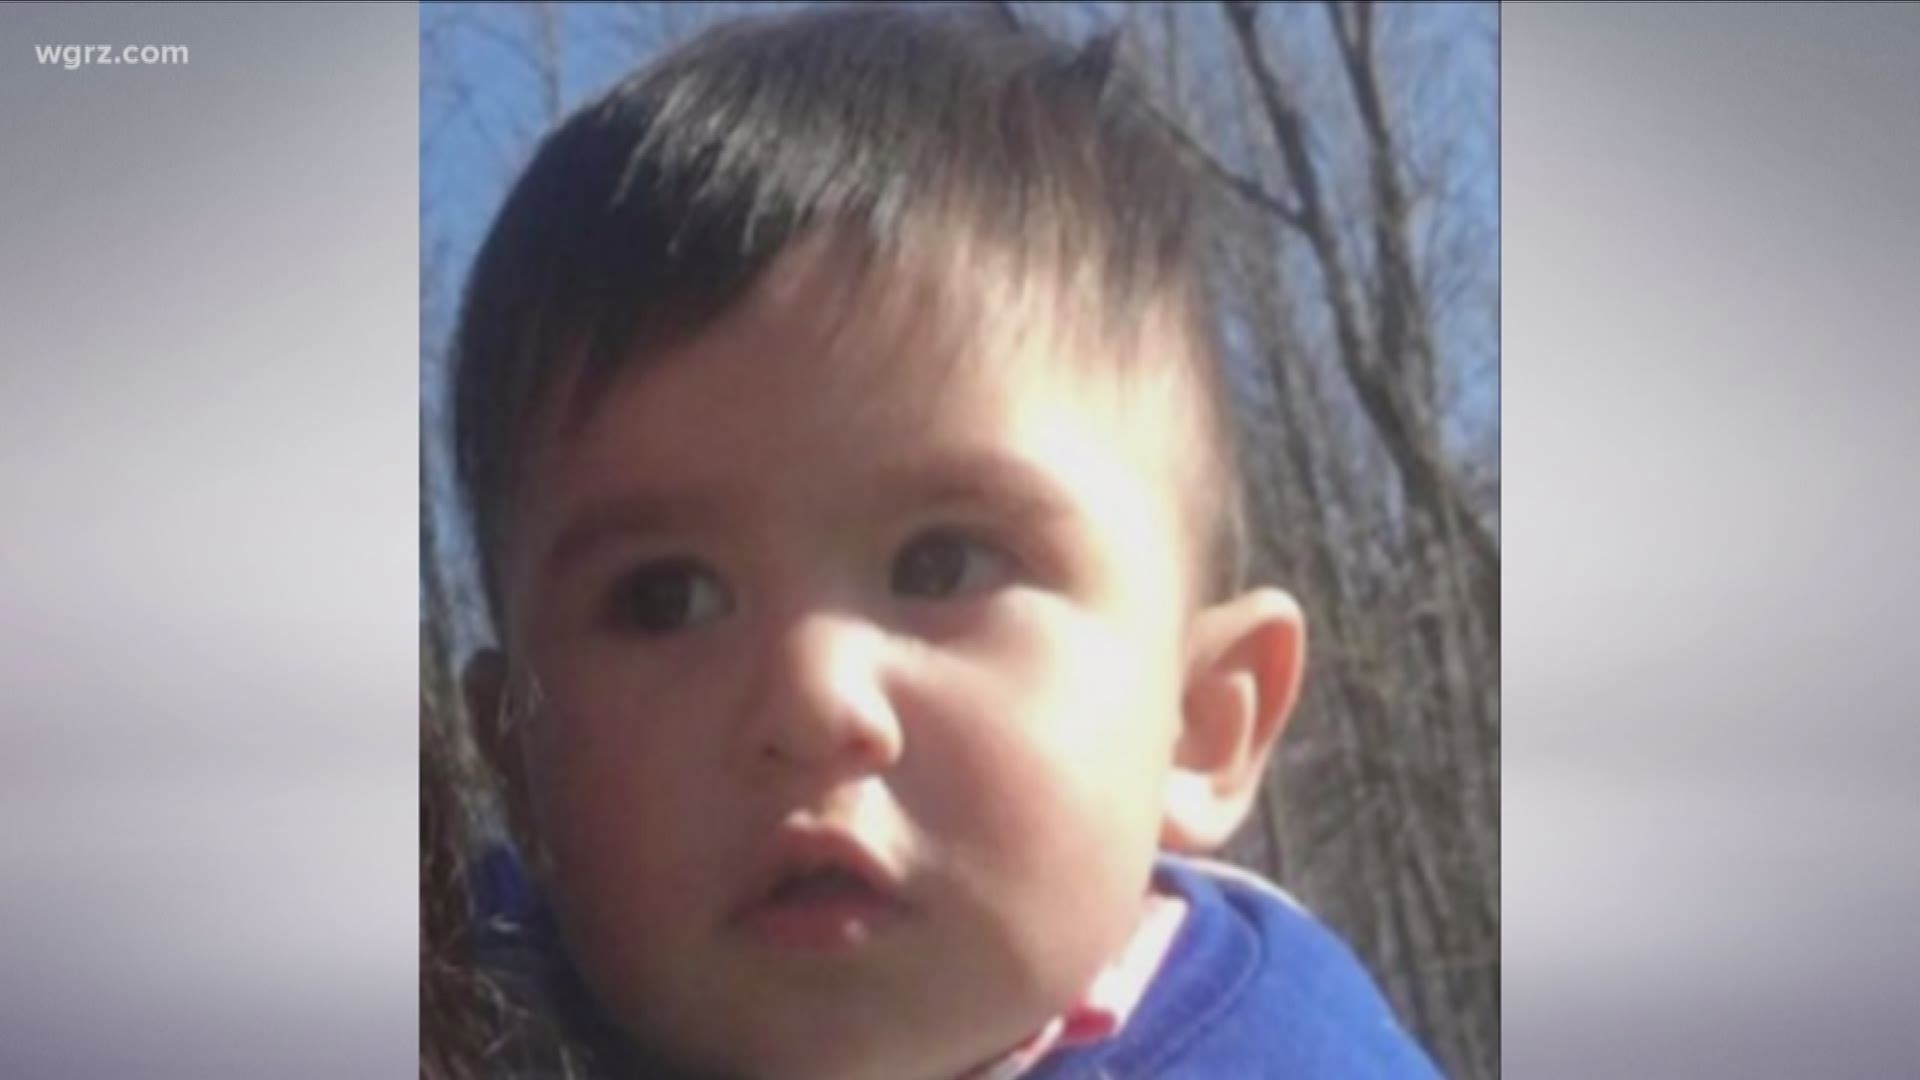 An AMBER ALERT has now been issued for a 14-month-old boy after his mother's body was found in a bag hidden in the woods.